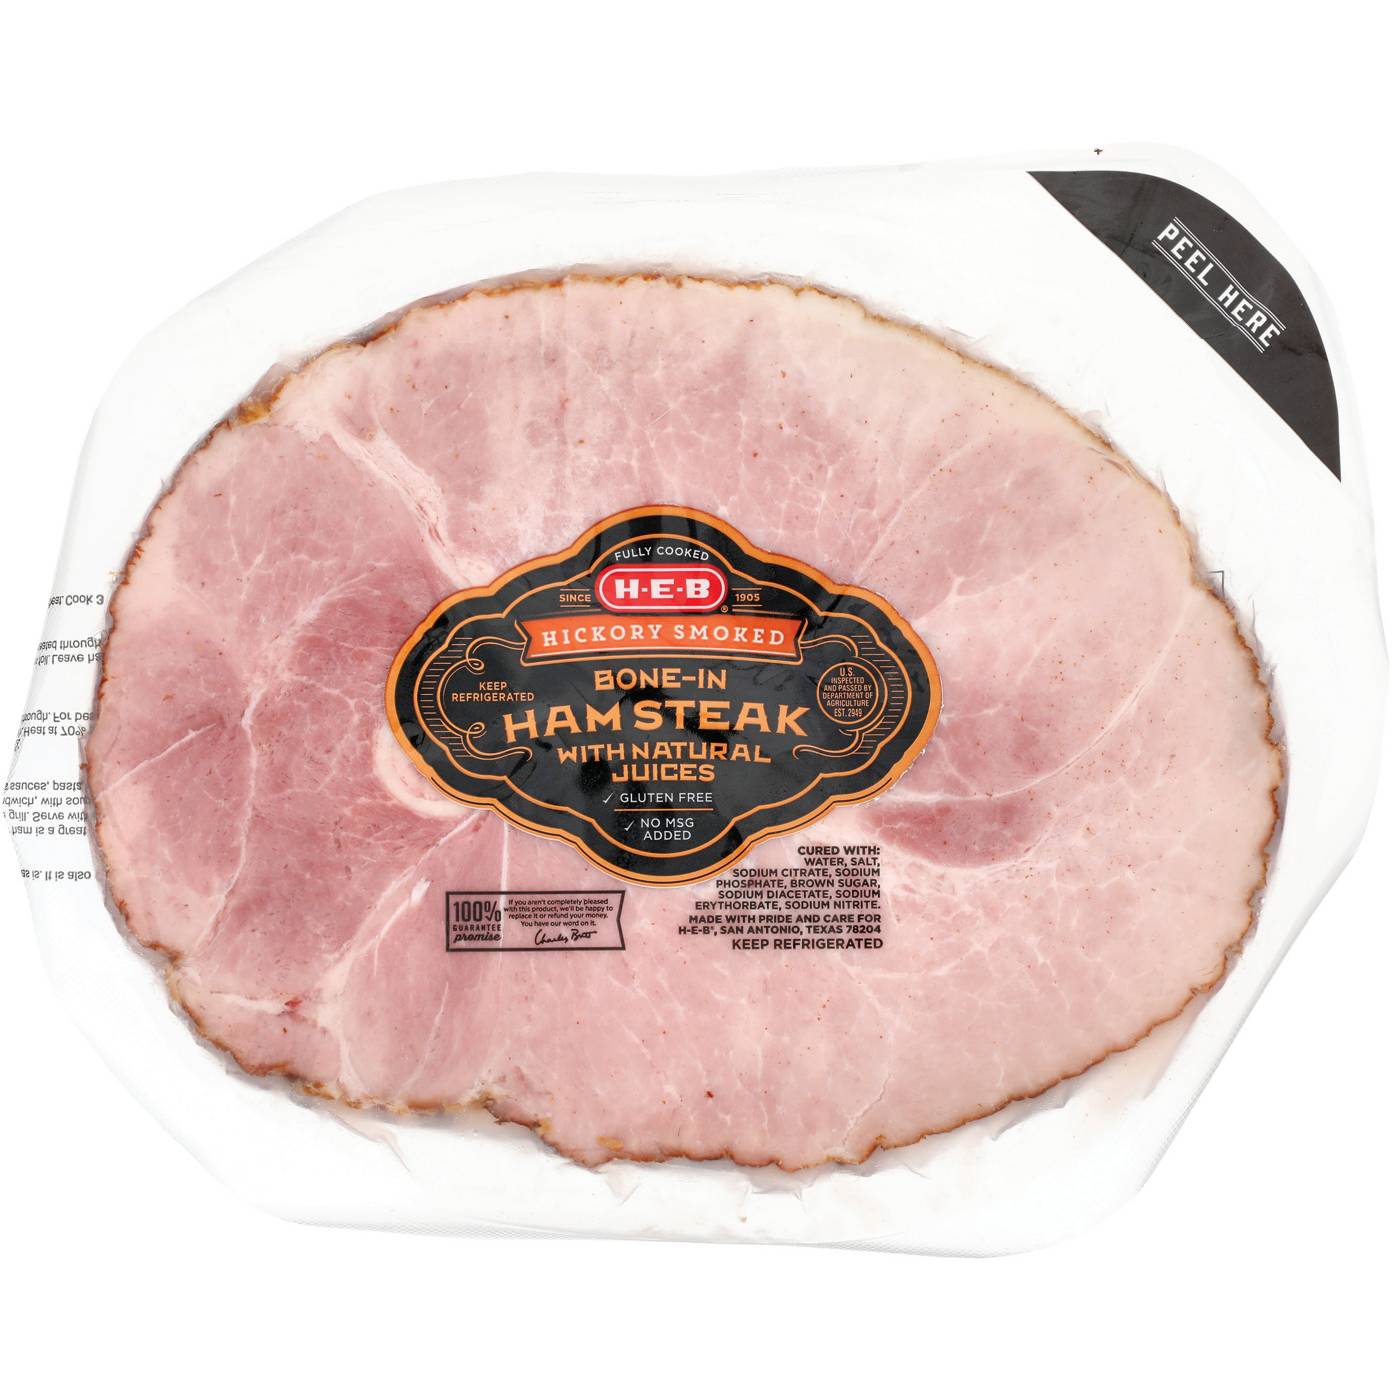 H-E-B Fully Cooked Bone-in Hickory Smoked Ham Steak; image 2 of 2